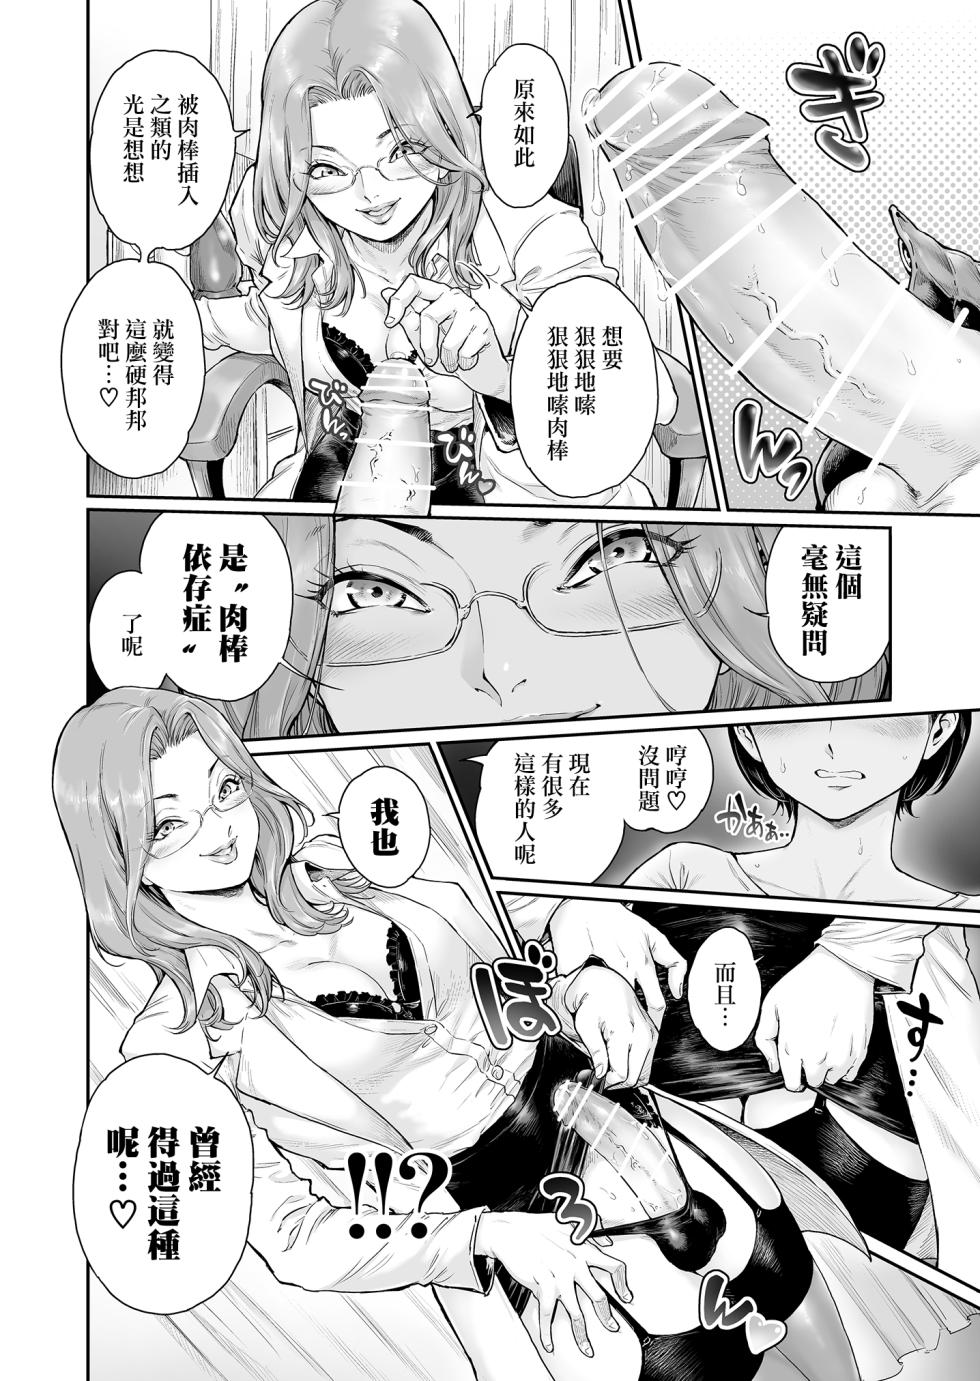 [Shotaian (Aian)] Appetizer. 3 [Chinese] [瑞树汉化组] - Page 4